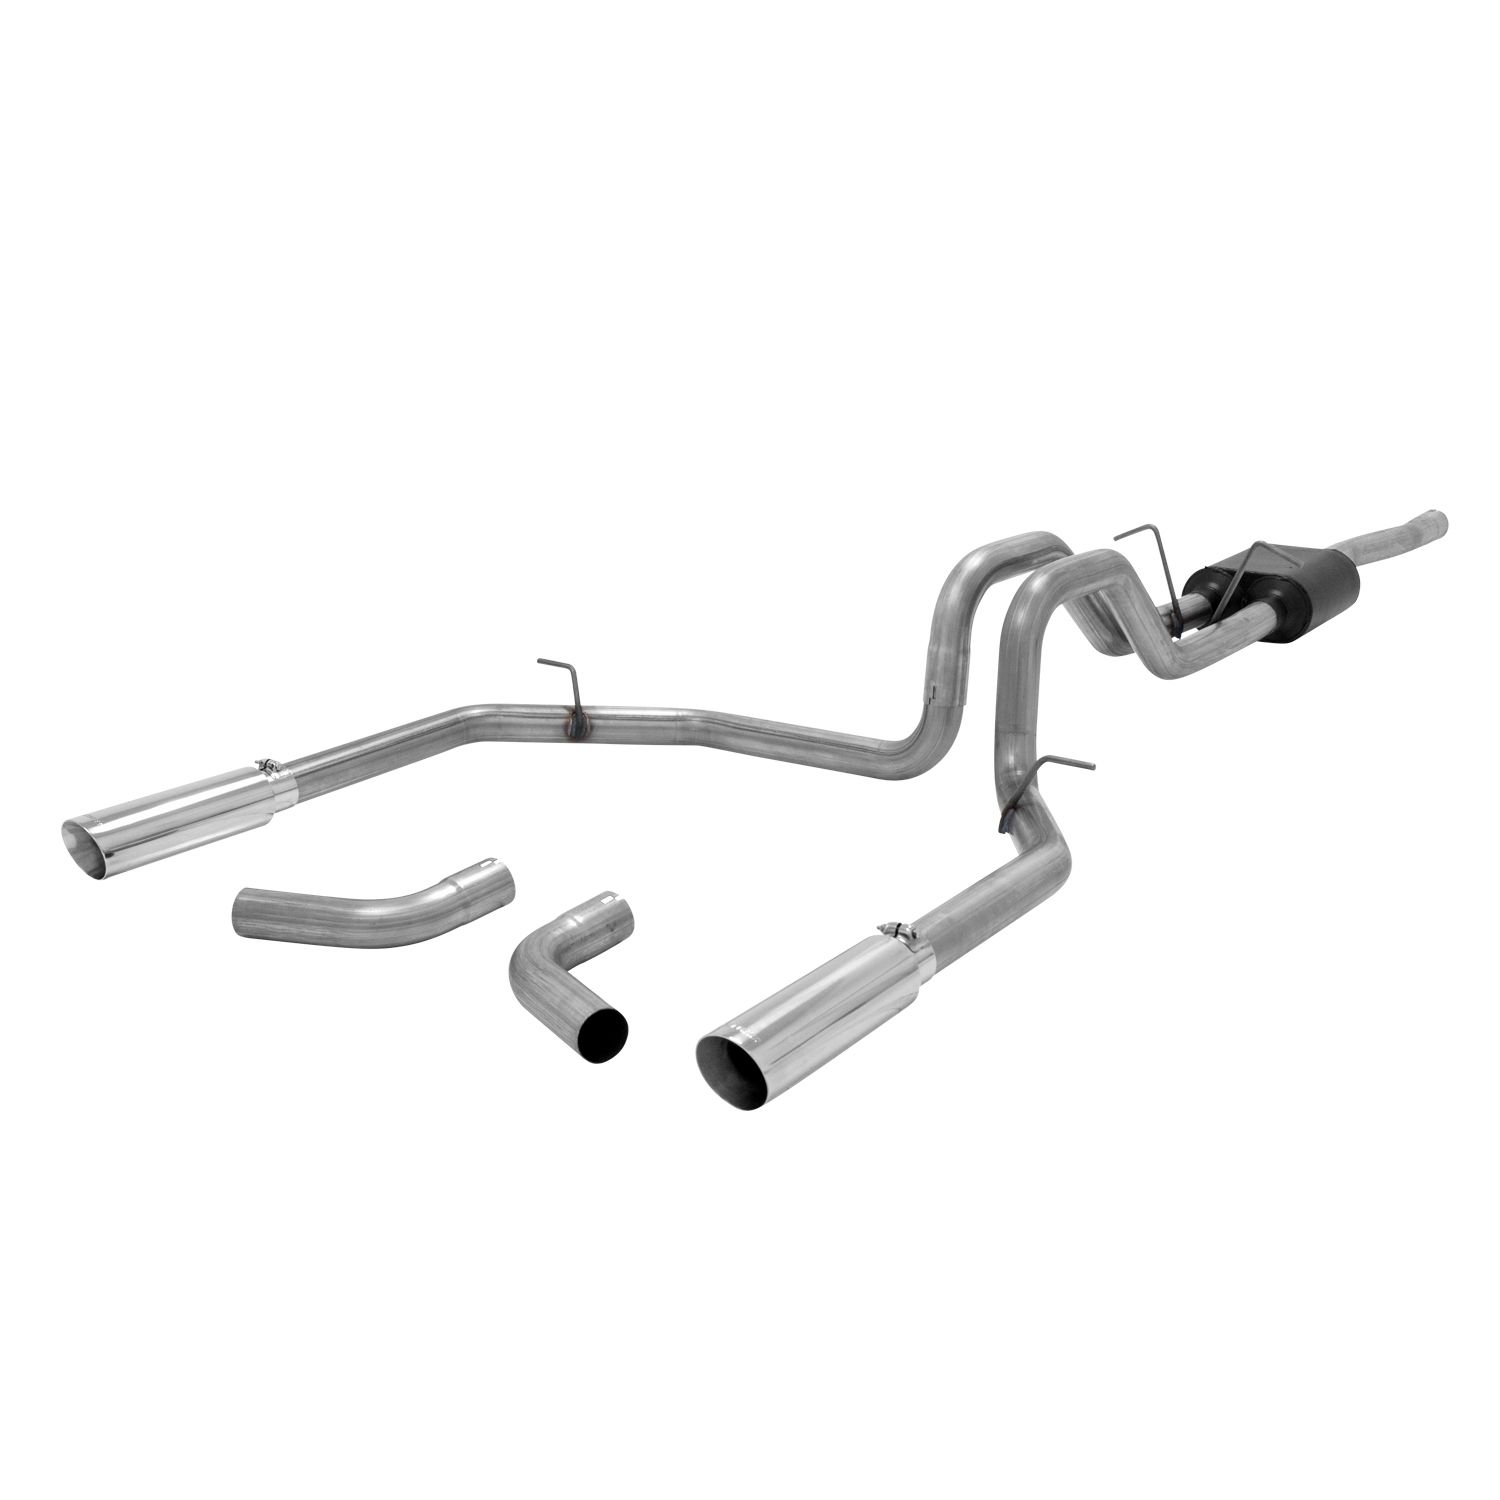 2001-2003 Ford F-150 King Ranch 4.6L/5.4L Flowmaster American Thunder Cat-Back Exhaust - 817663